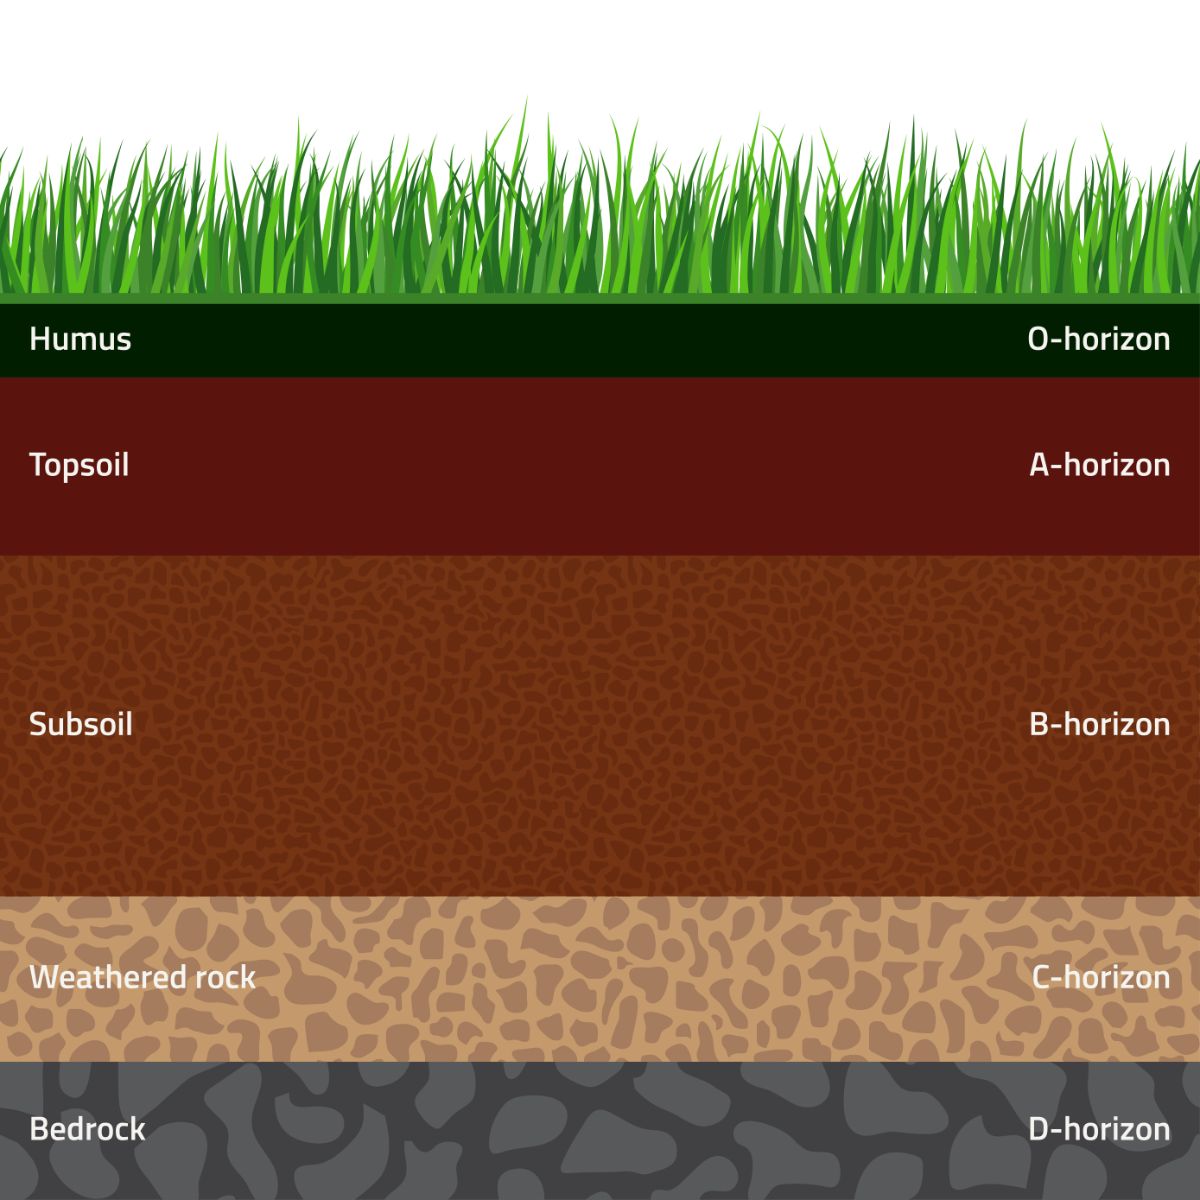 A graphic explaining the layers of soil